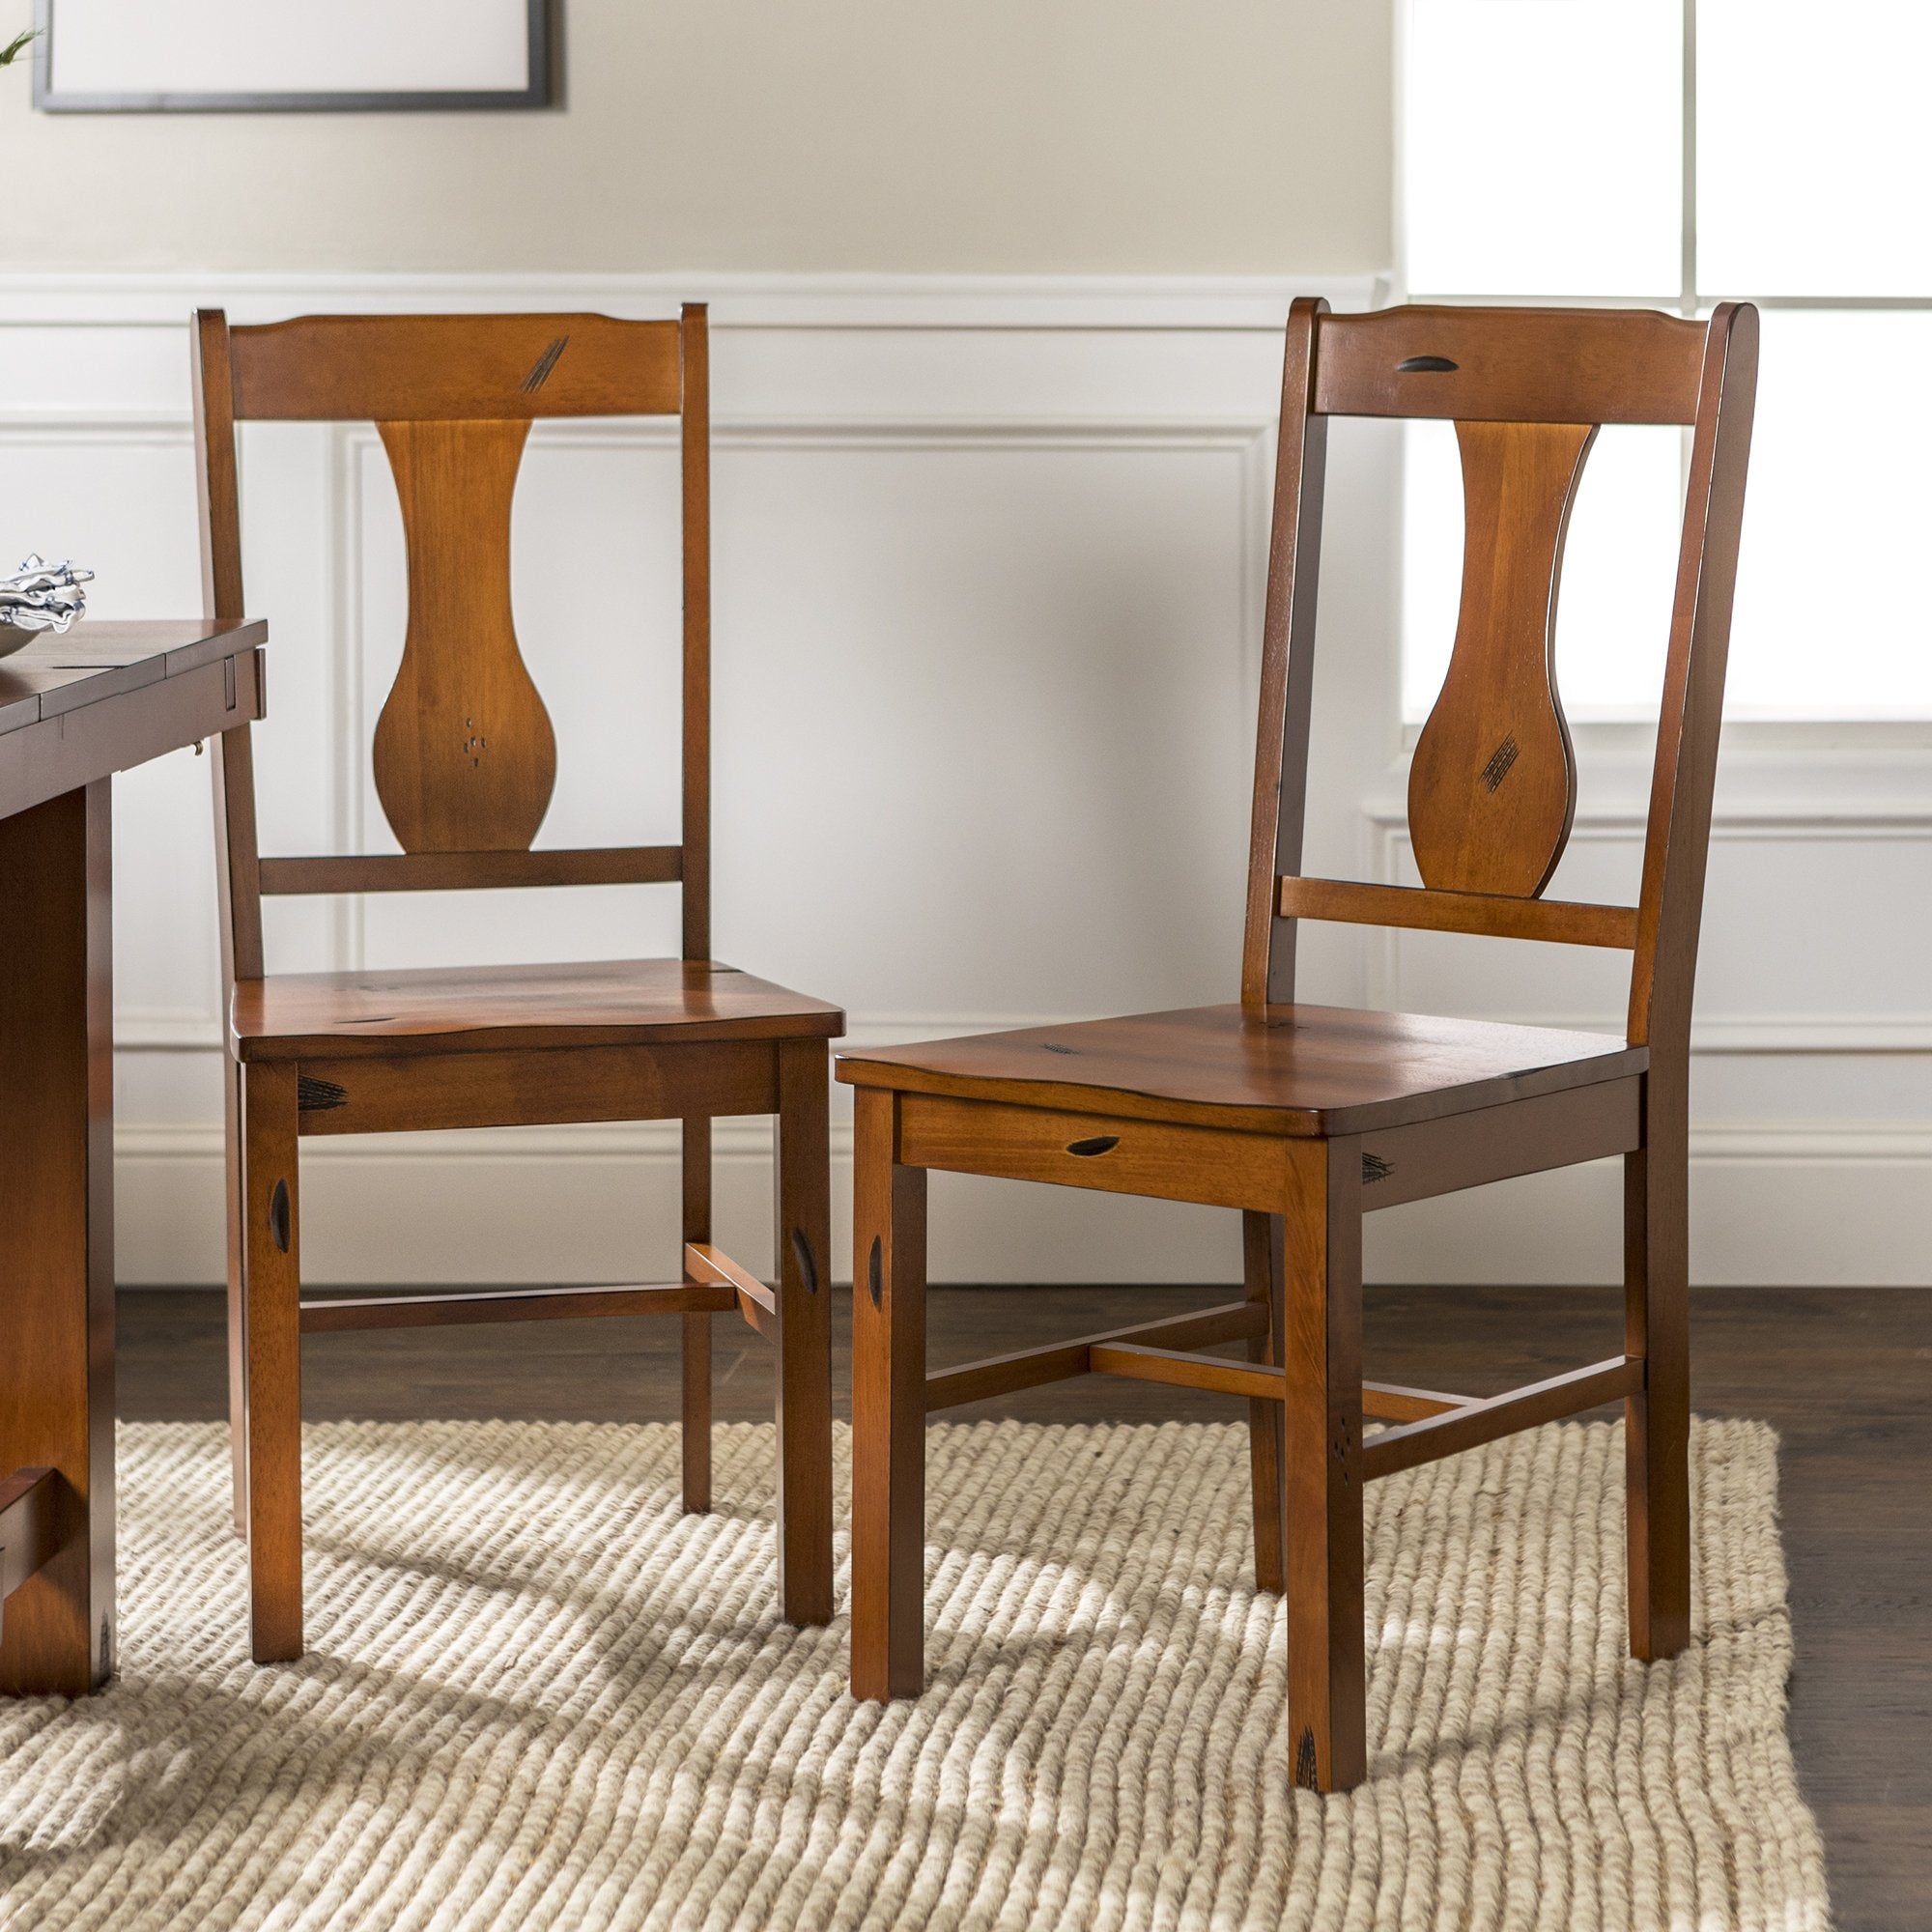 Rustic Wood Dining Chairs, Set of 2